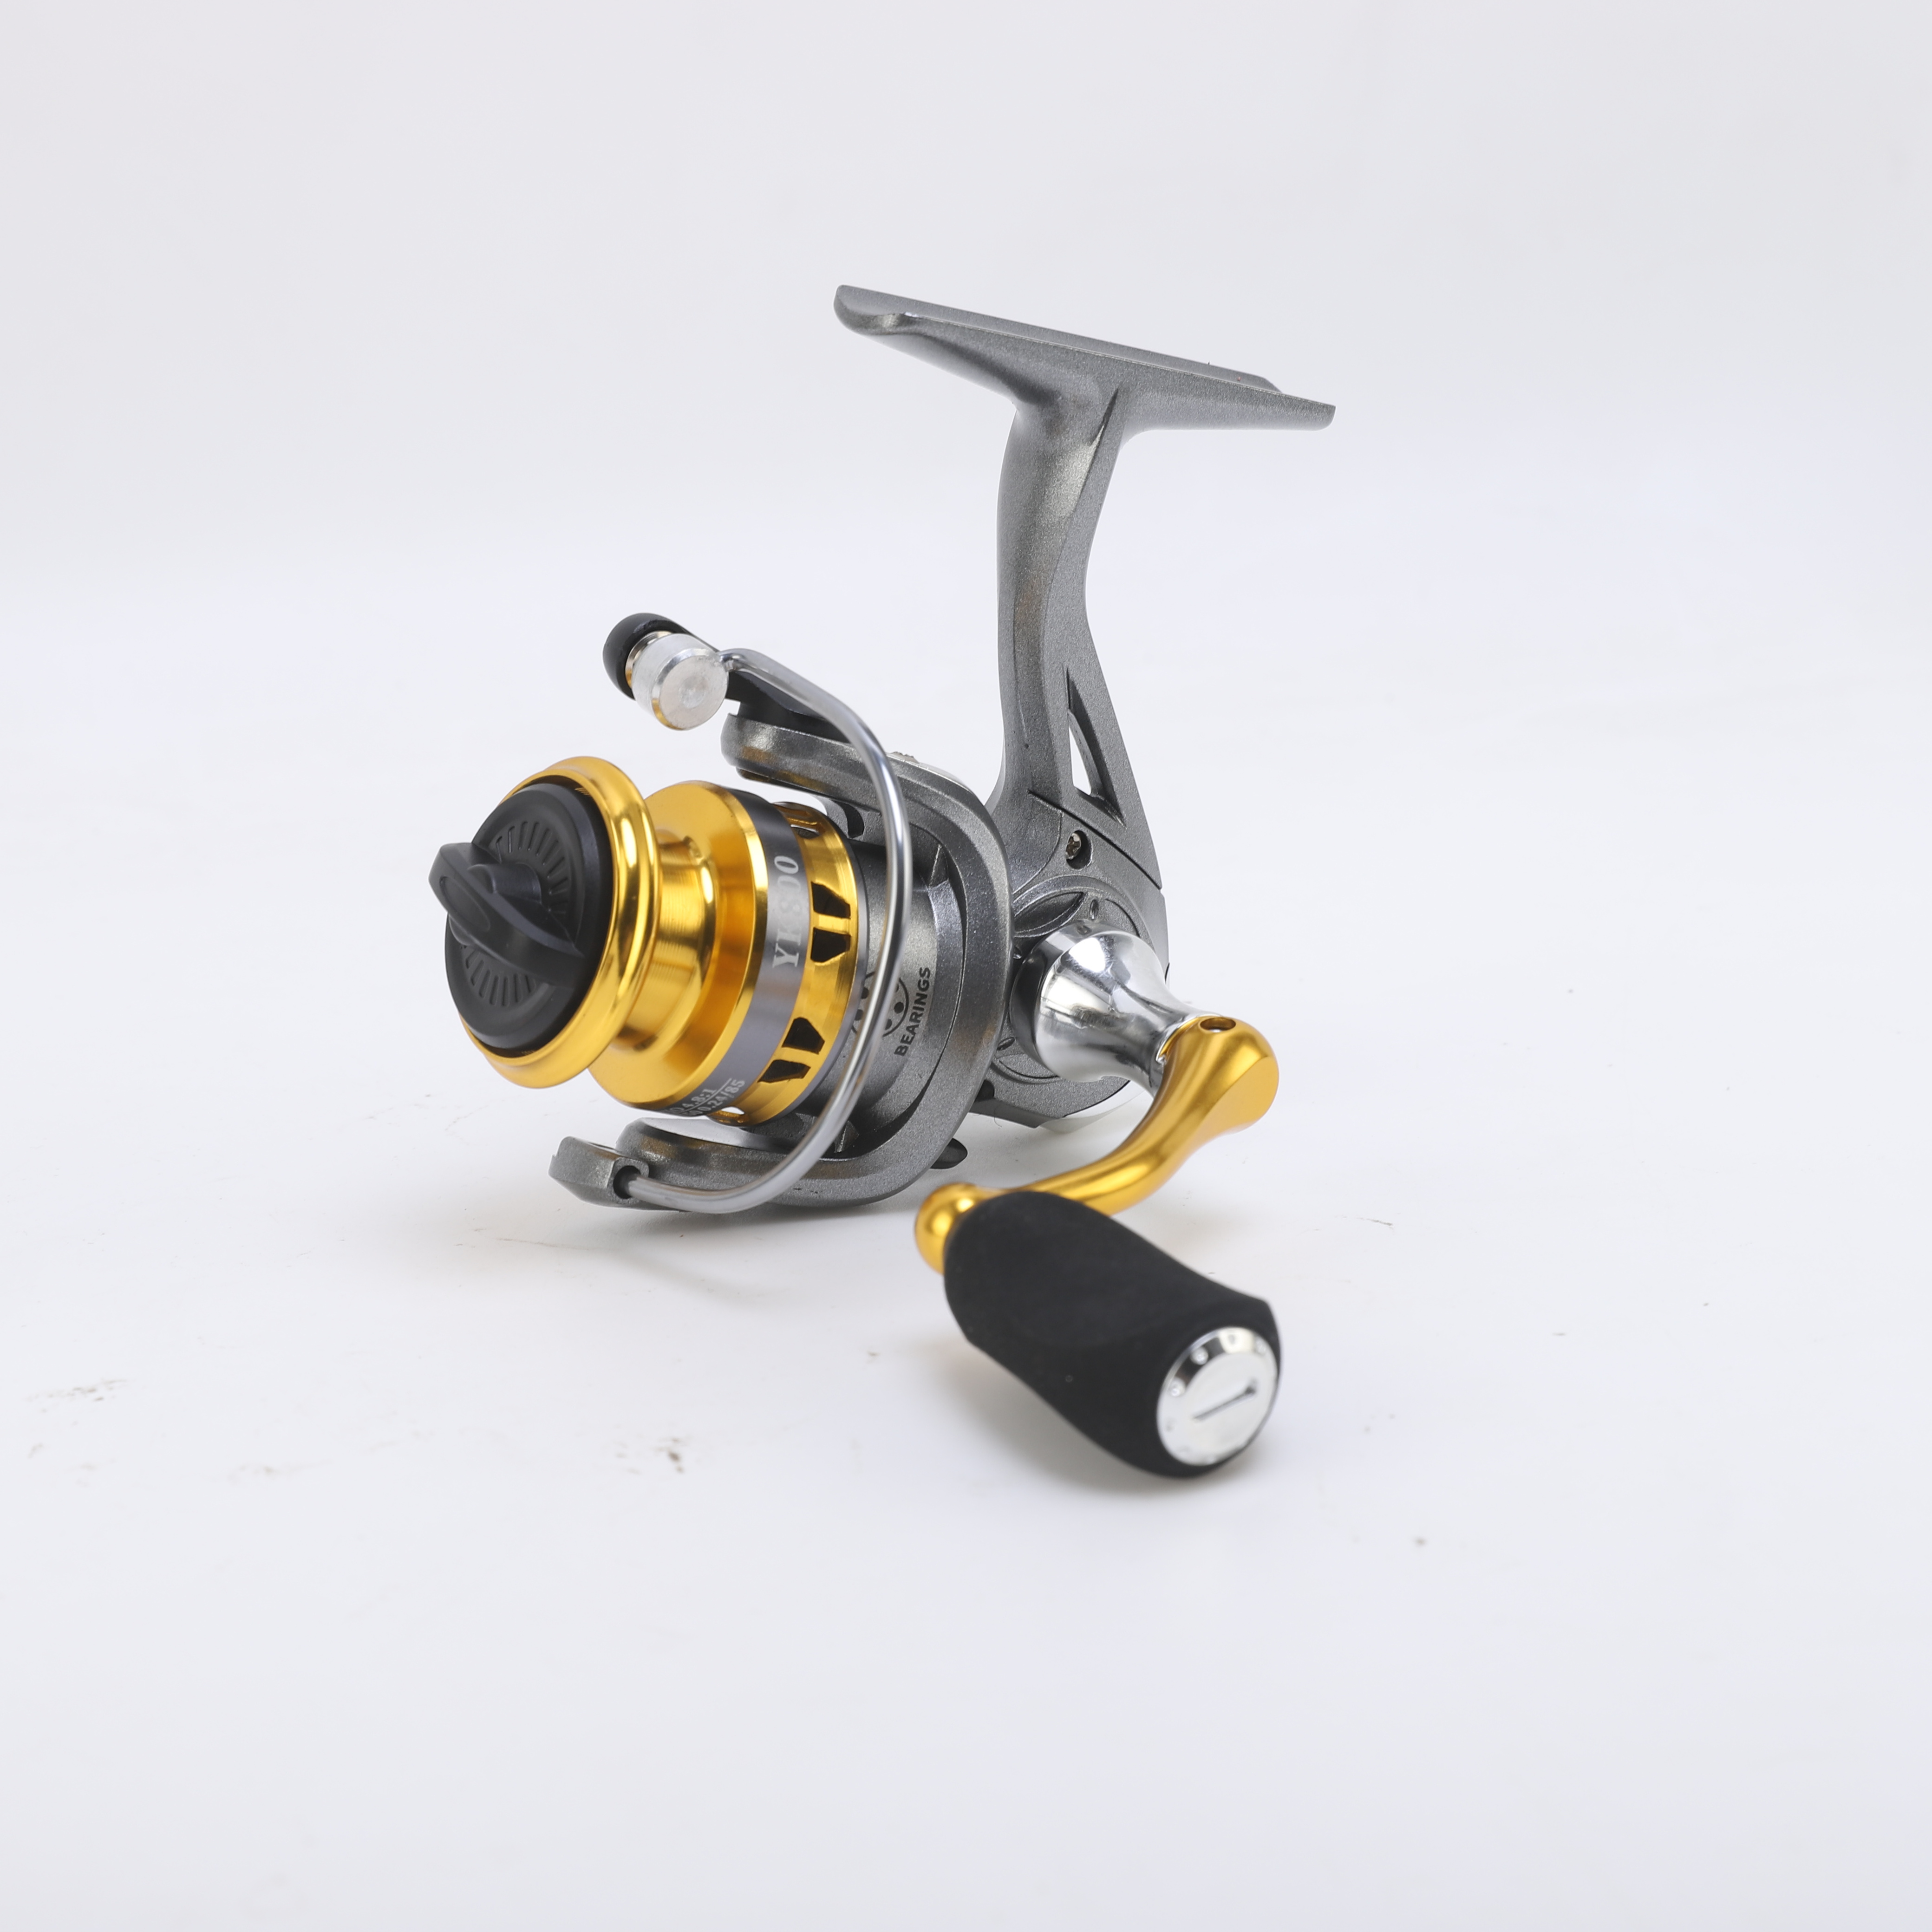 Spinning Fishing Reel 5.0:1 Gear Ratio Fishing Reels Stainless steel Main  Shaft with 5-10kg Carbon Drag for Freshwater or Saltwater Spinning Reel,KD4000  : Buy Online at Best Price in KSA - Souq